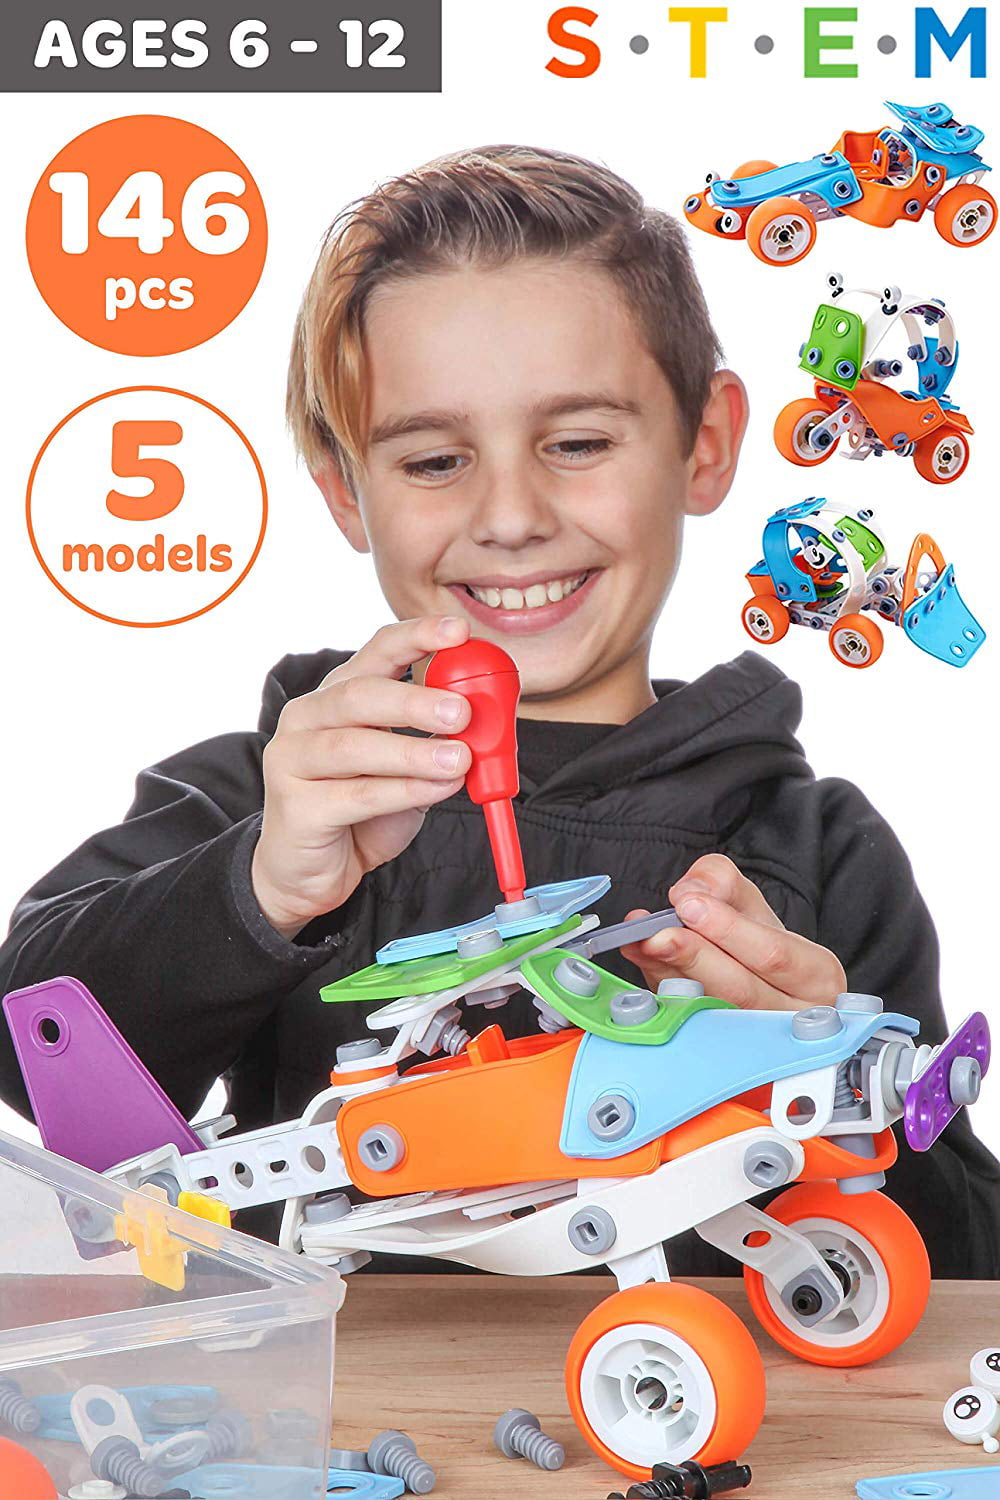 stem kits for 12 year olds